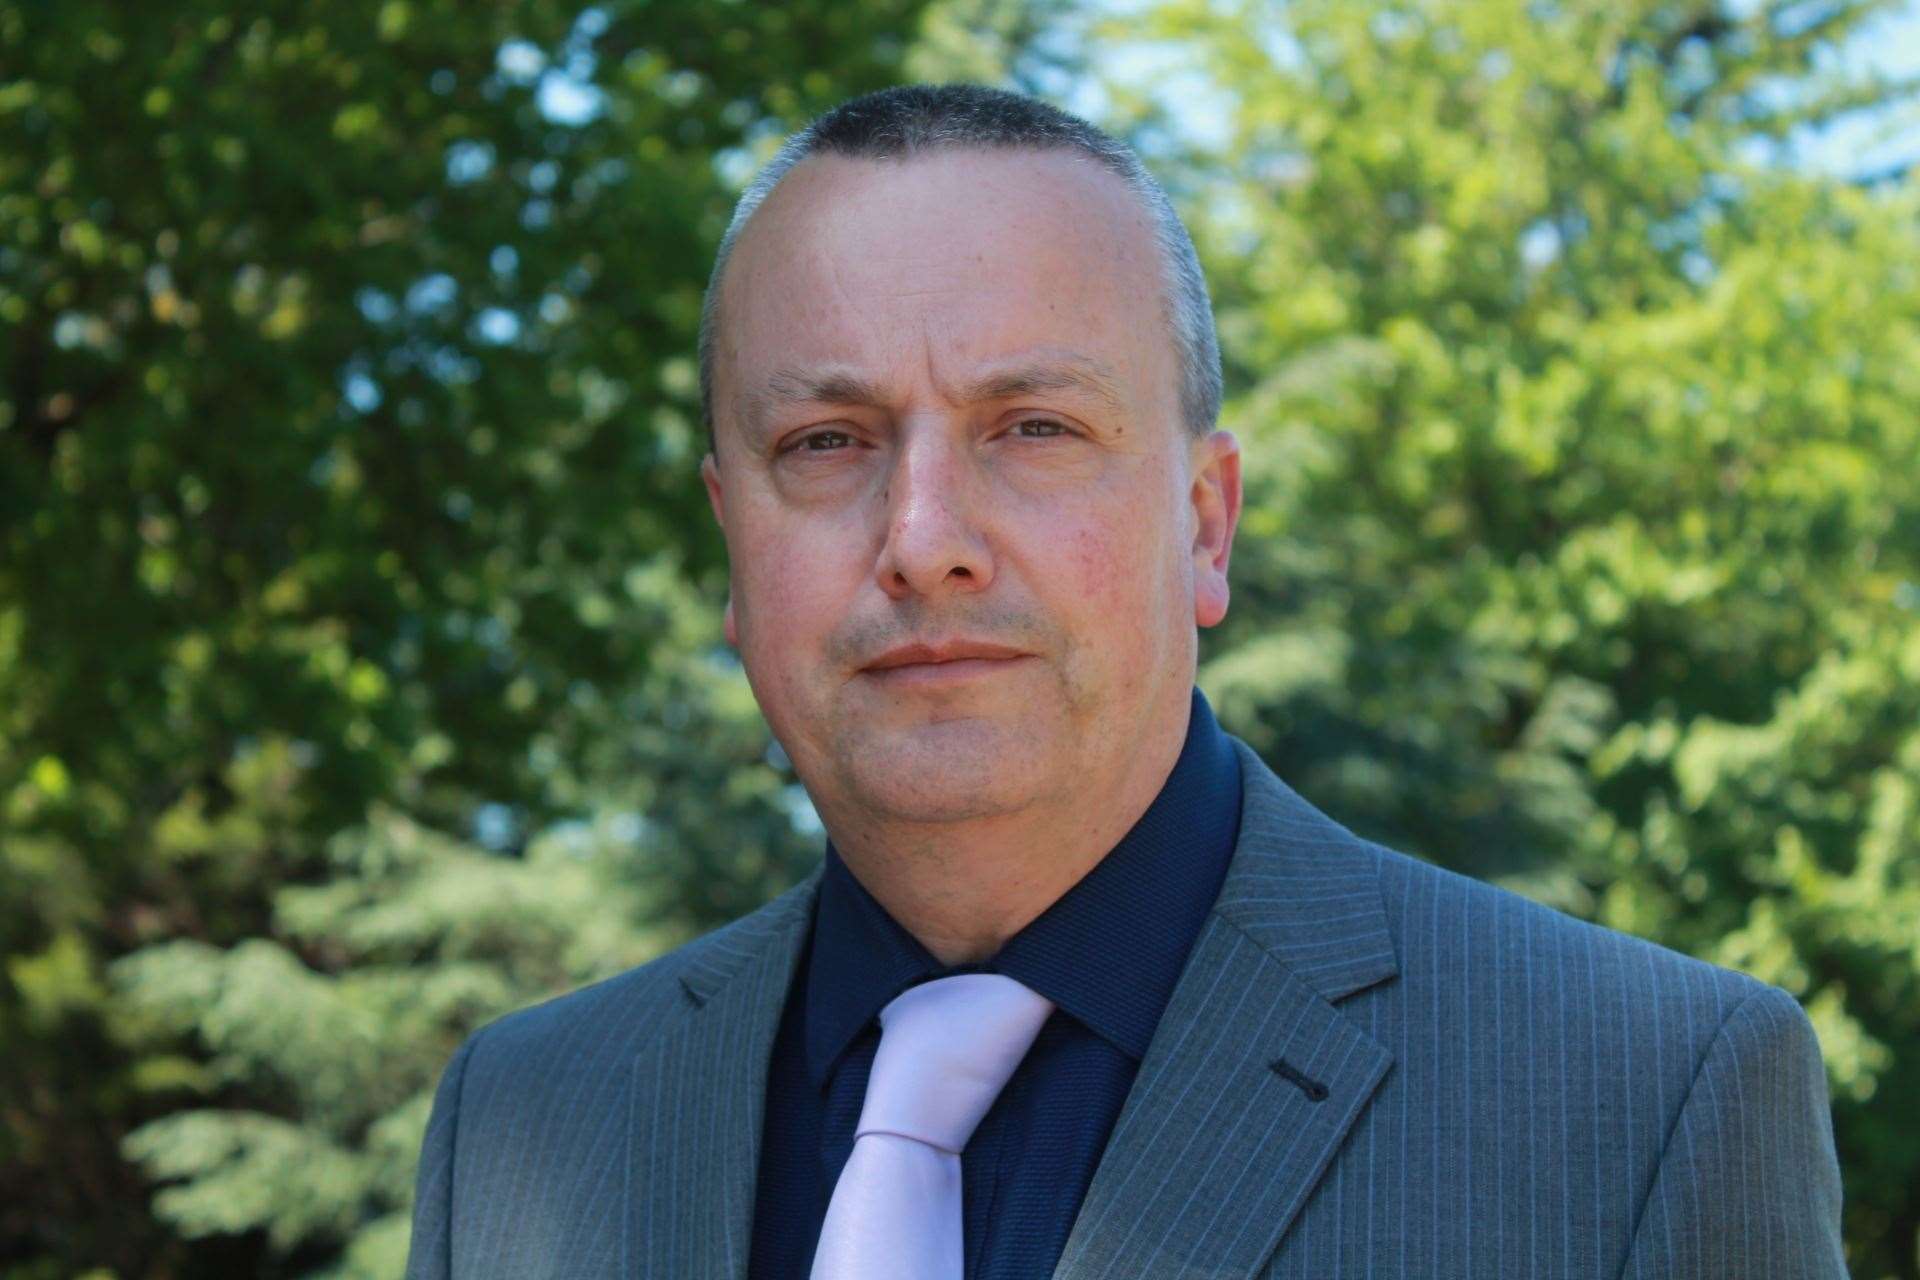 Neil Mennie, the chairman of the Kent Police Federation